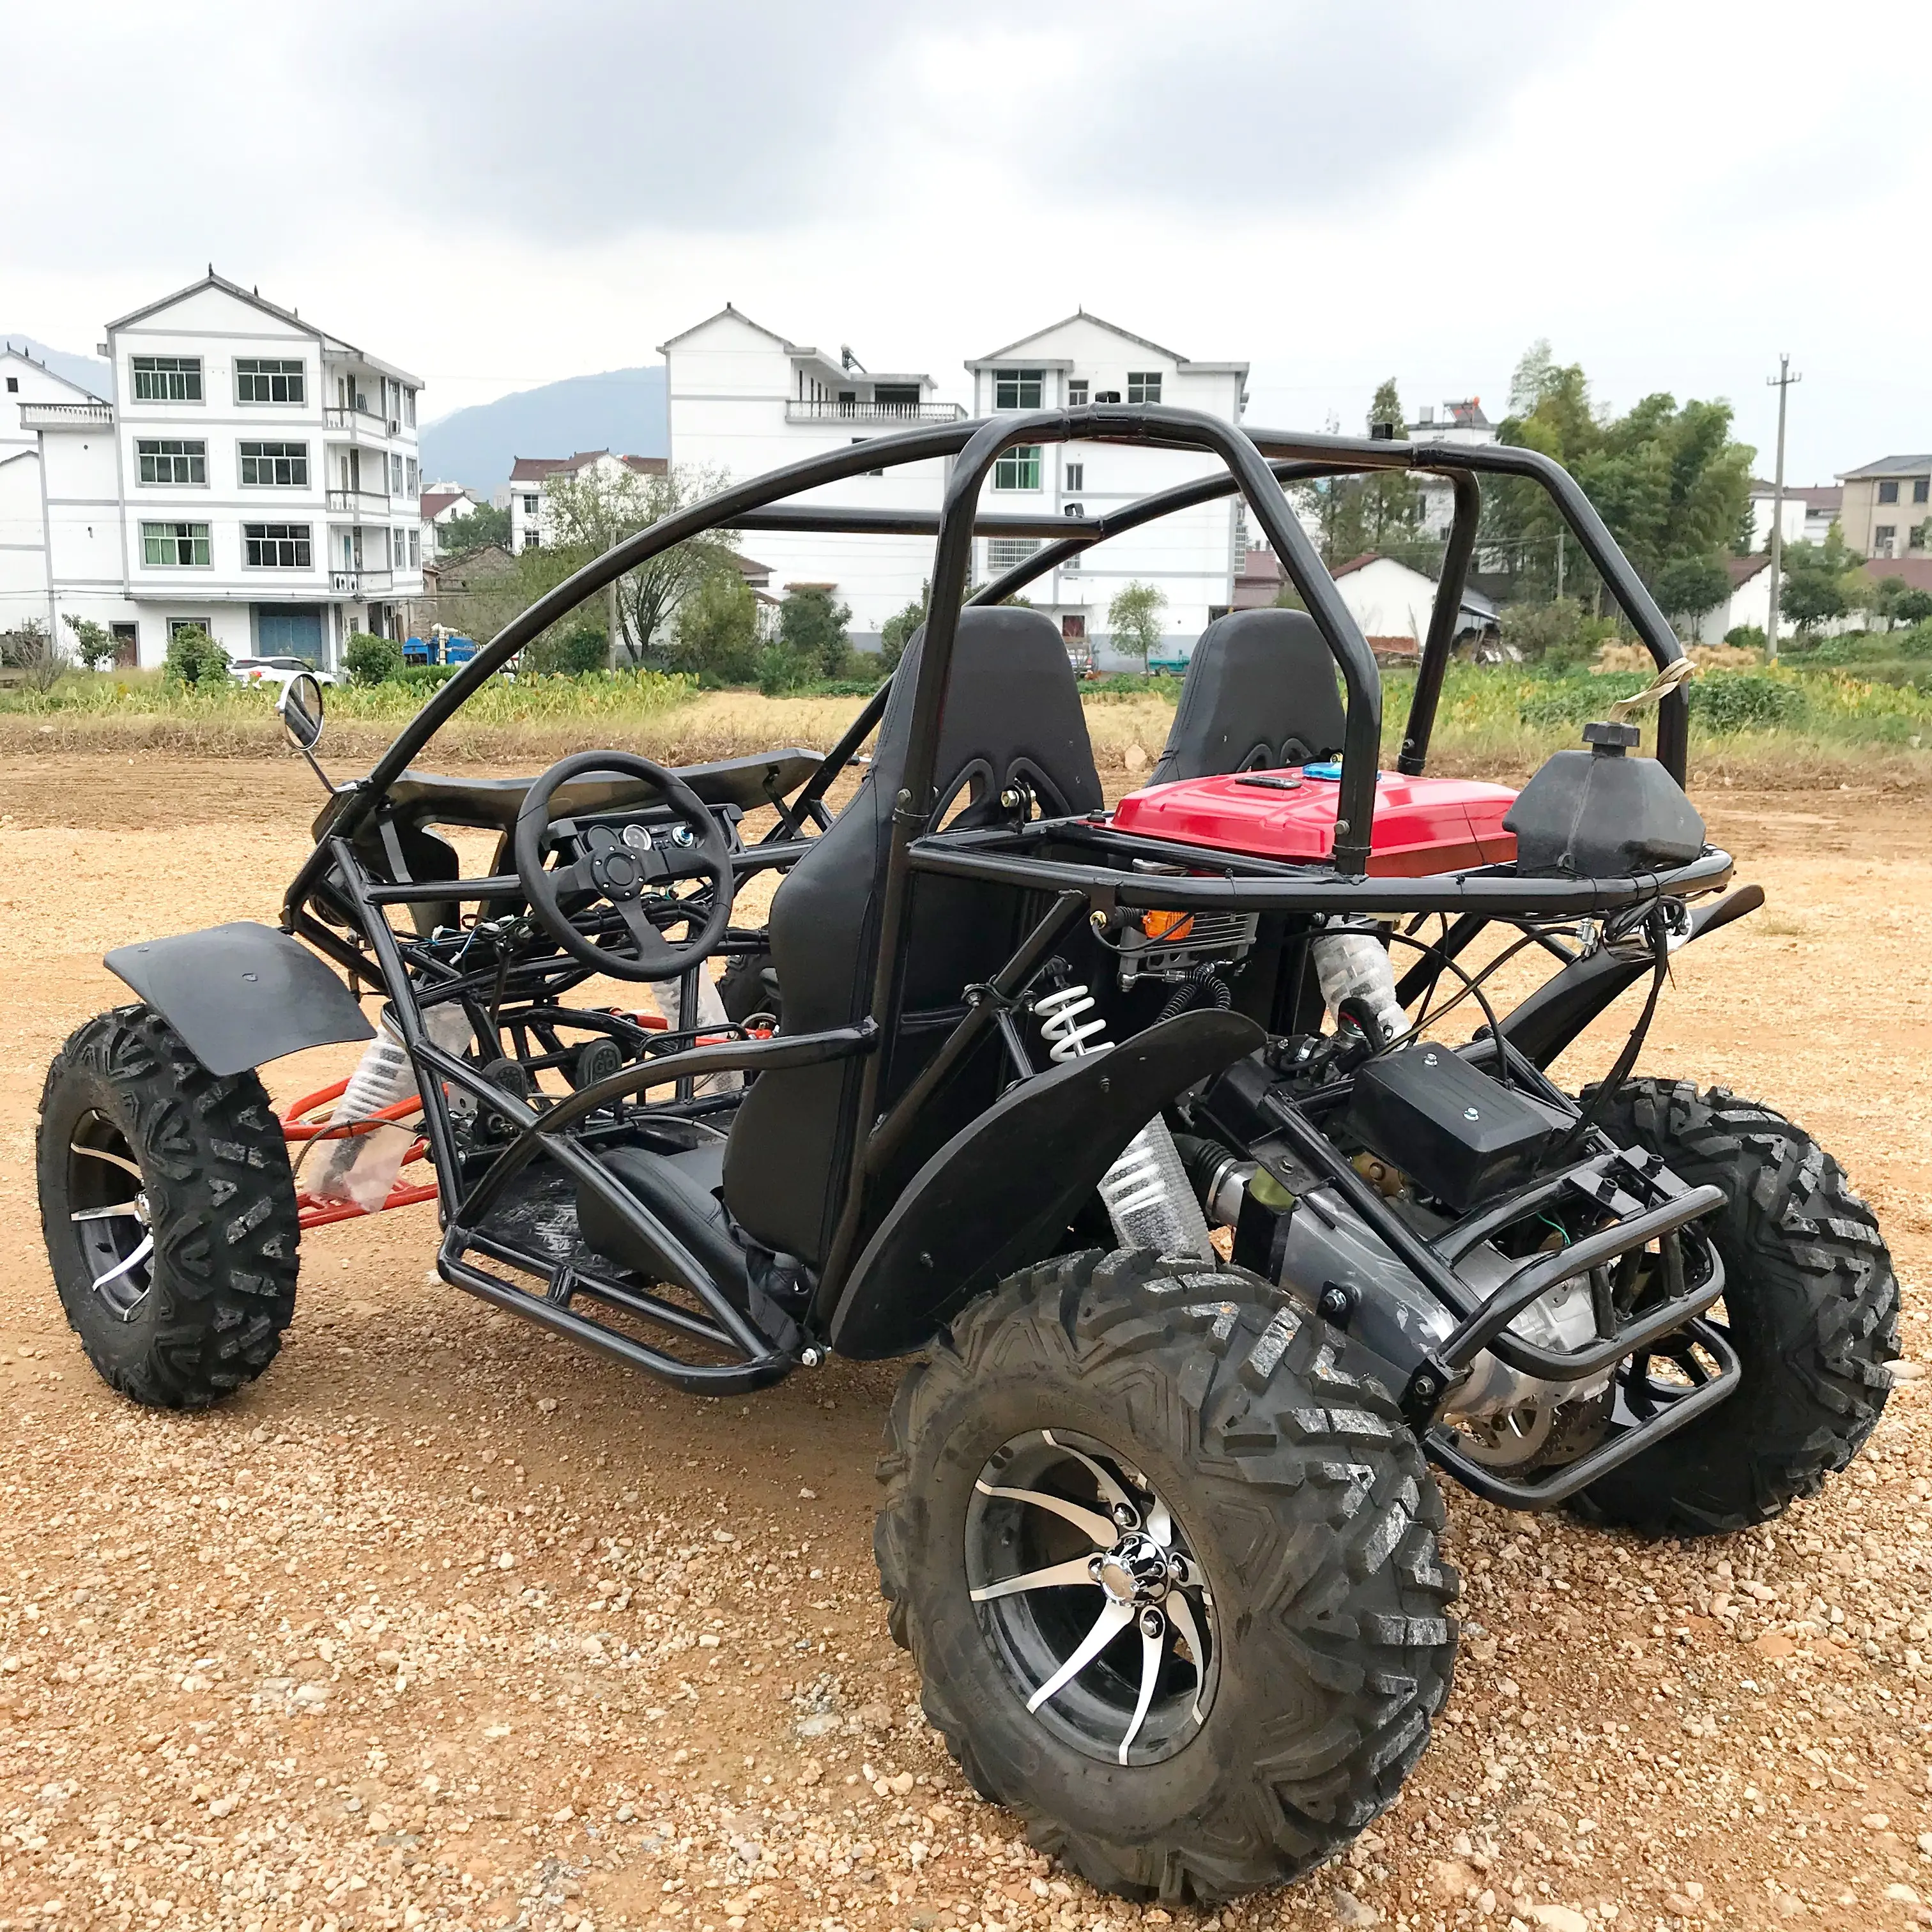 Go Karts LNA Hearty Exhaust 200cc Off Road Cheap Go Karts For Sale